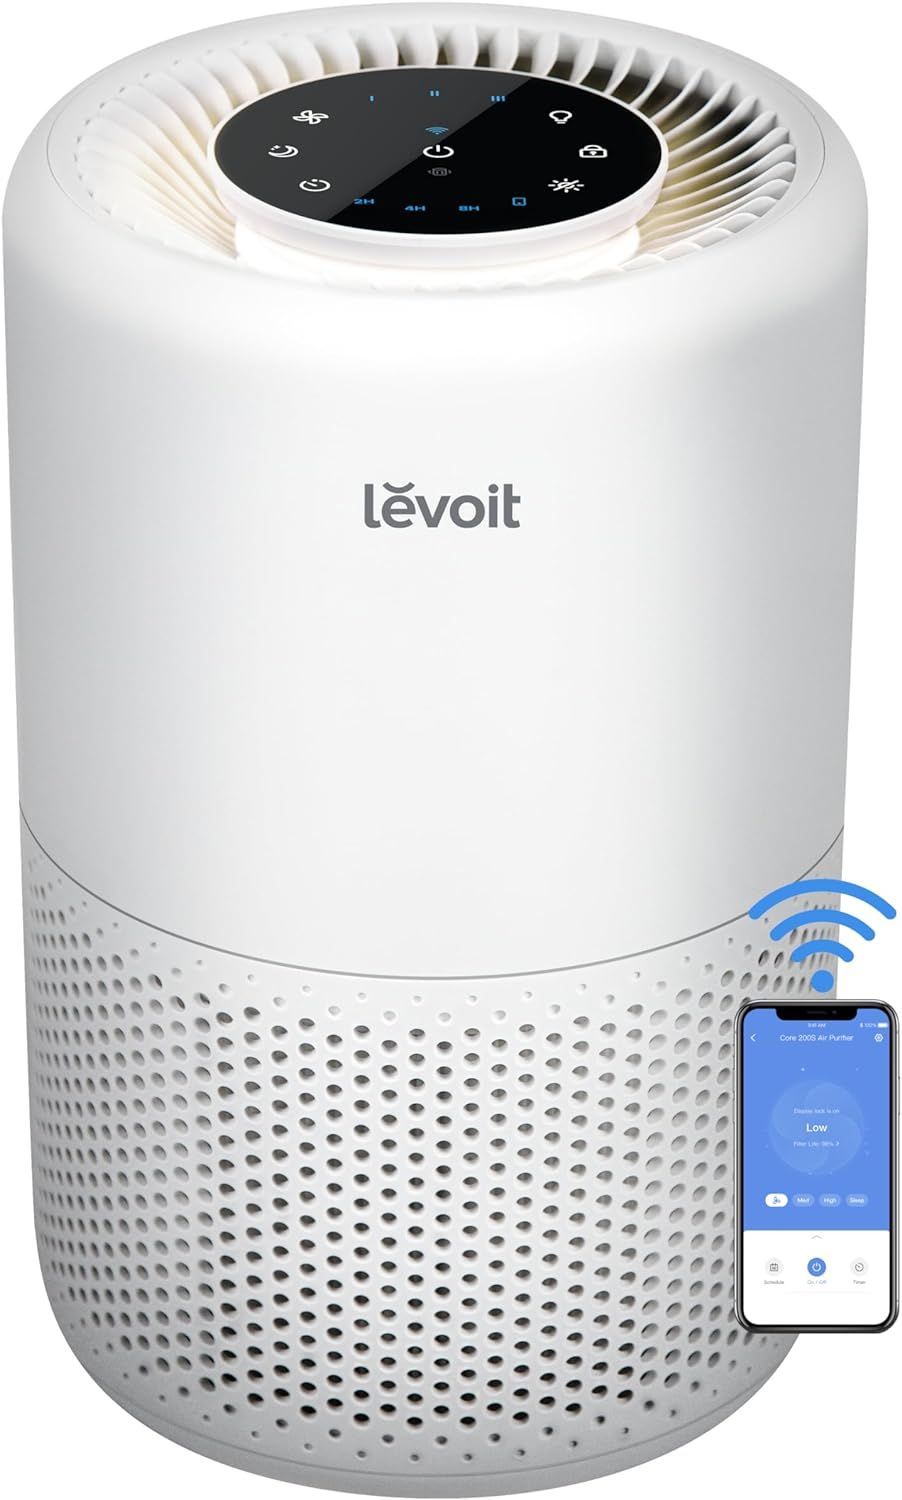 LEVOIT Air Purifiers for Home Large Room, Smart WiFi Alexa Control, H13 True HEPA Filter, Removes 99.97% of Pollutants, Covers up to 915 Sq.Foot, 24dB Quiet Cleaner for Bedroom, Core 200S, White